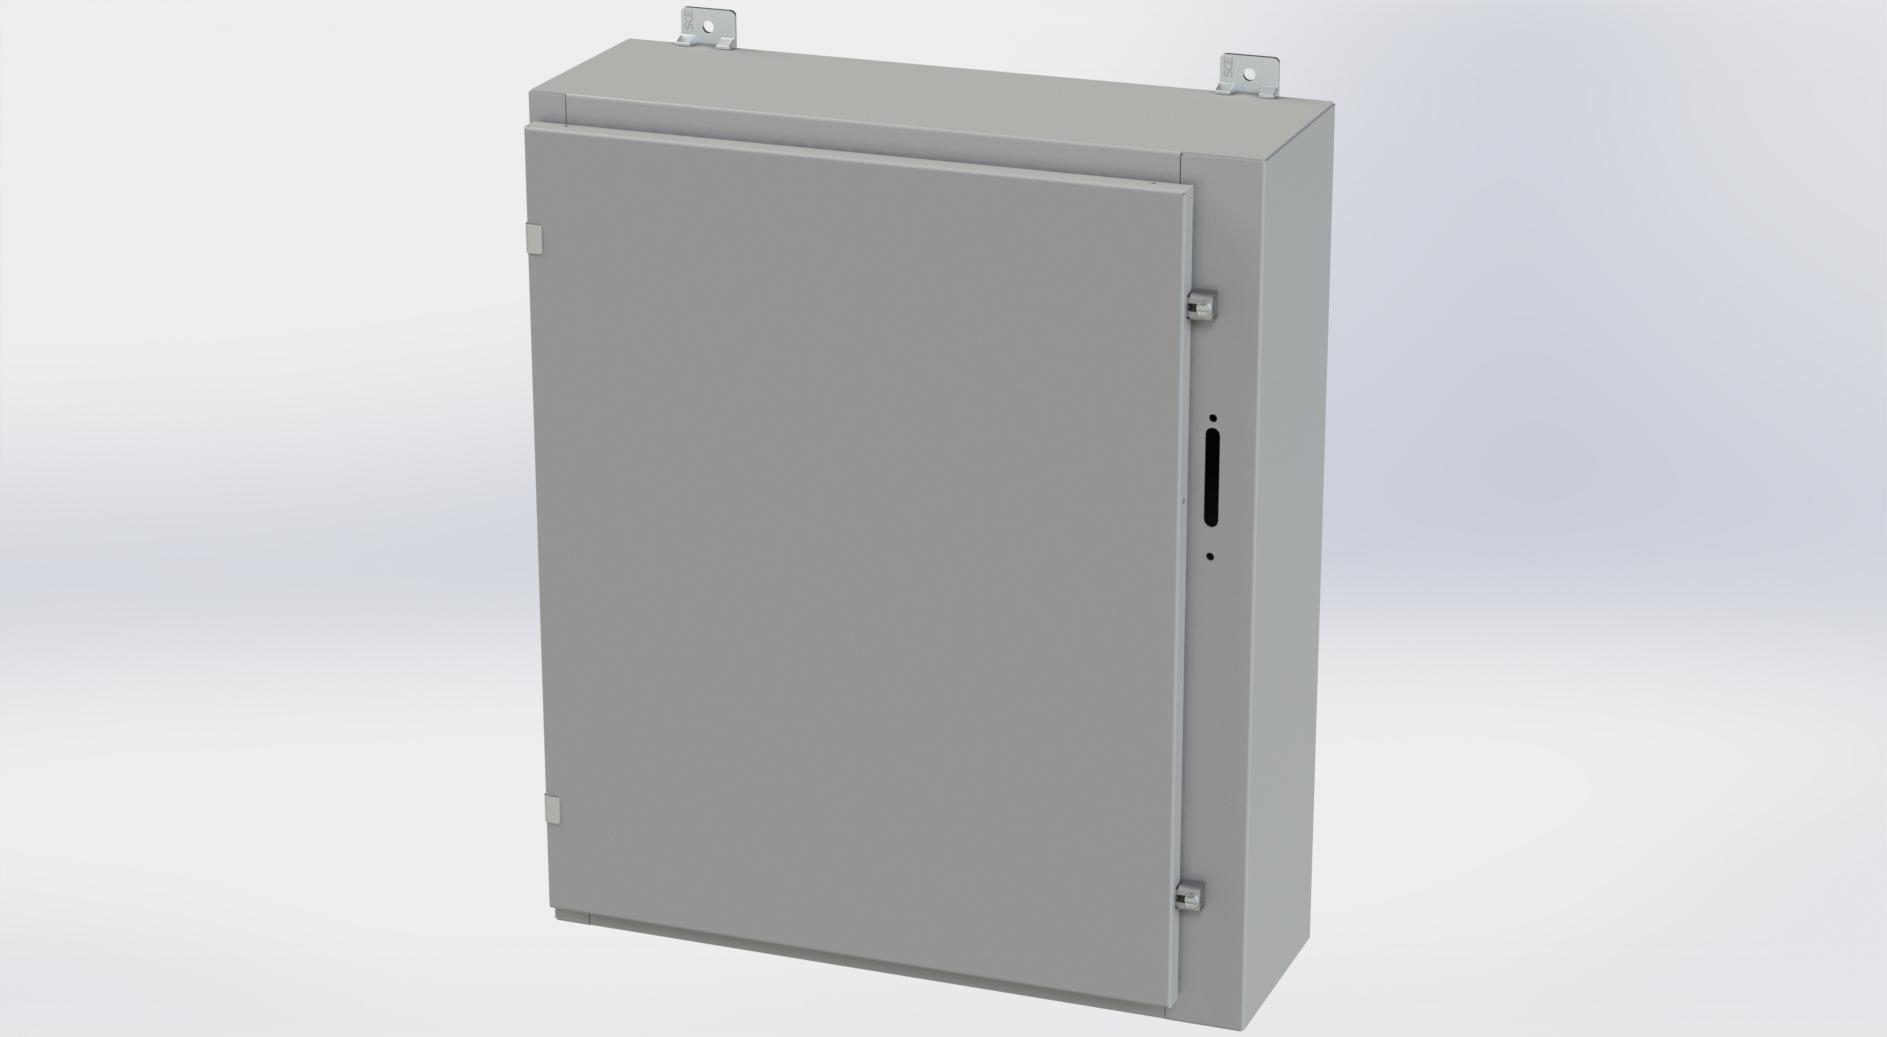 Saginaw Control SCE-30HS2508LP HS LP Enclosure, Height:30.00", Width:25.38", Depth:8.00", ANSI-61 gray powder coating inside and out. Optional sub-panels are powder coated white.